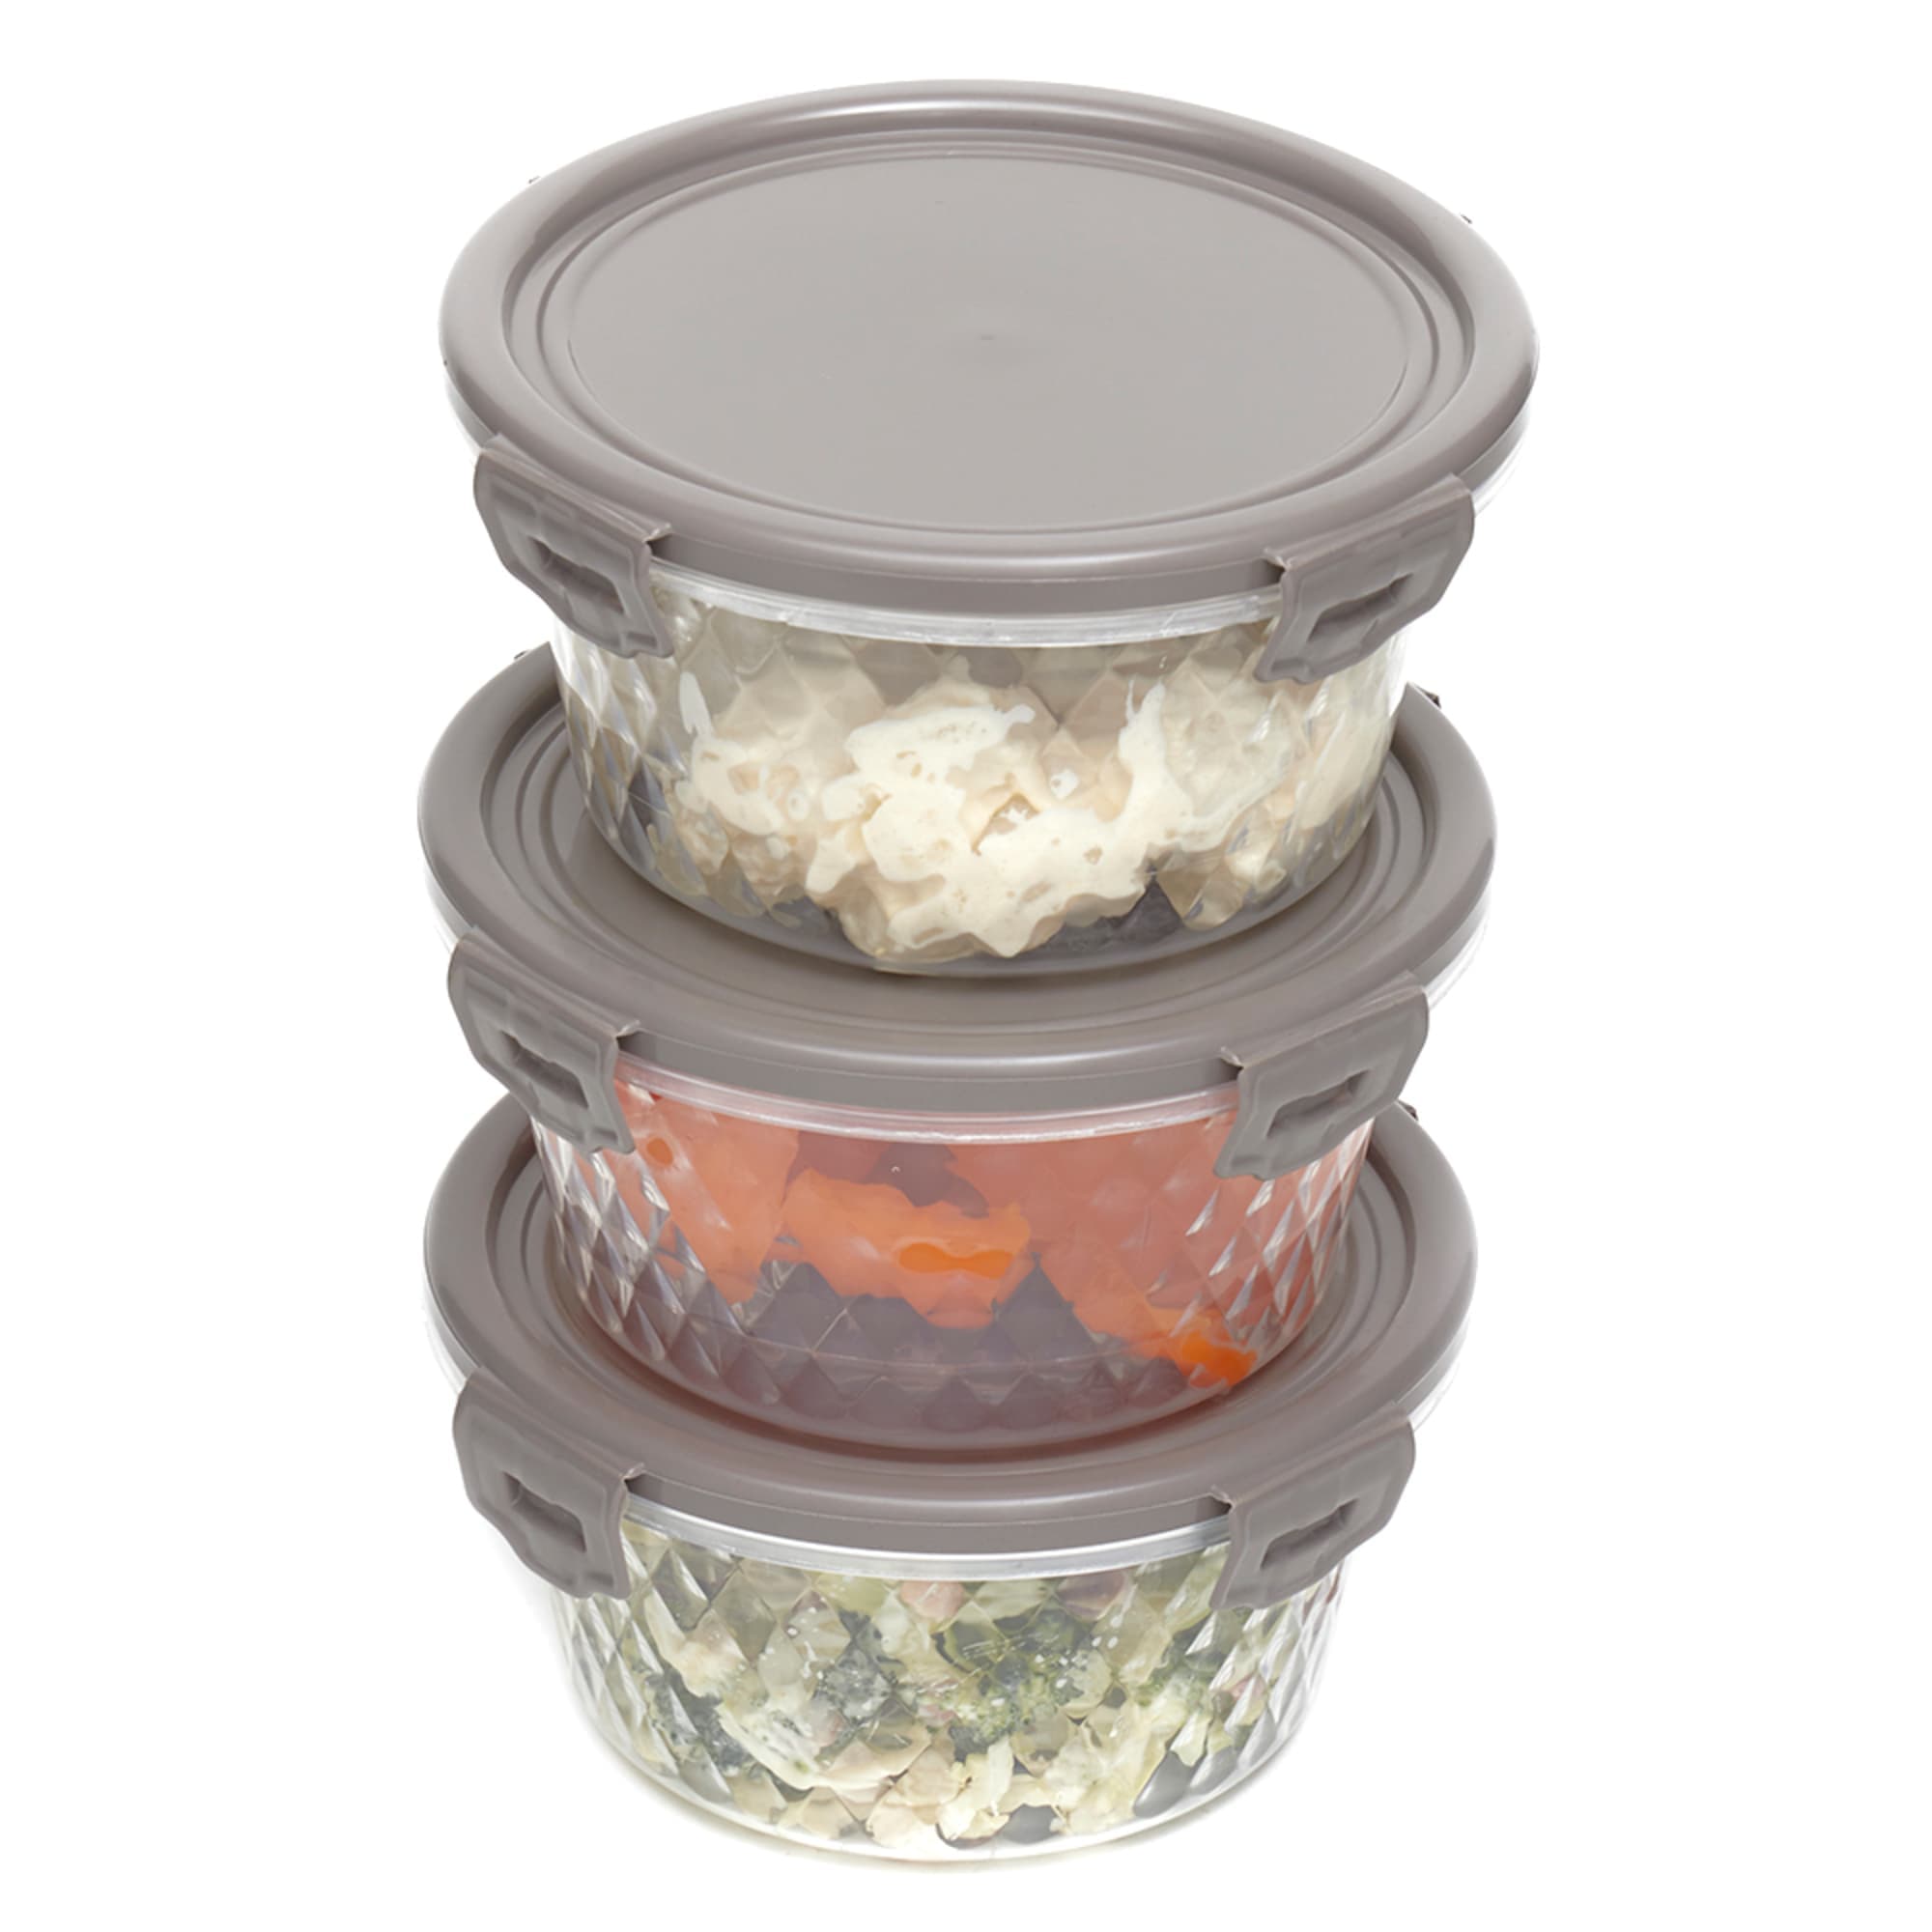   Basics Glass Food Storage Container with BPA